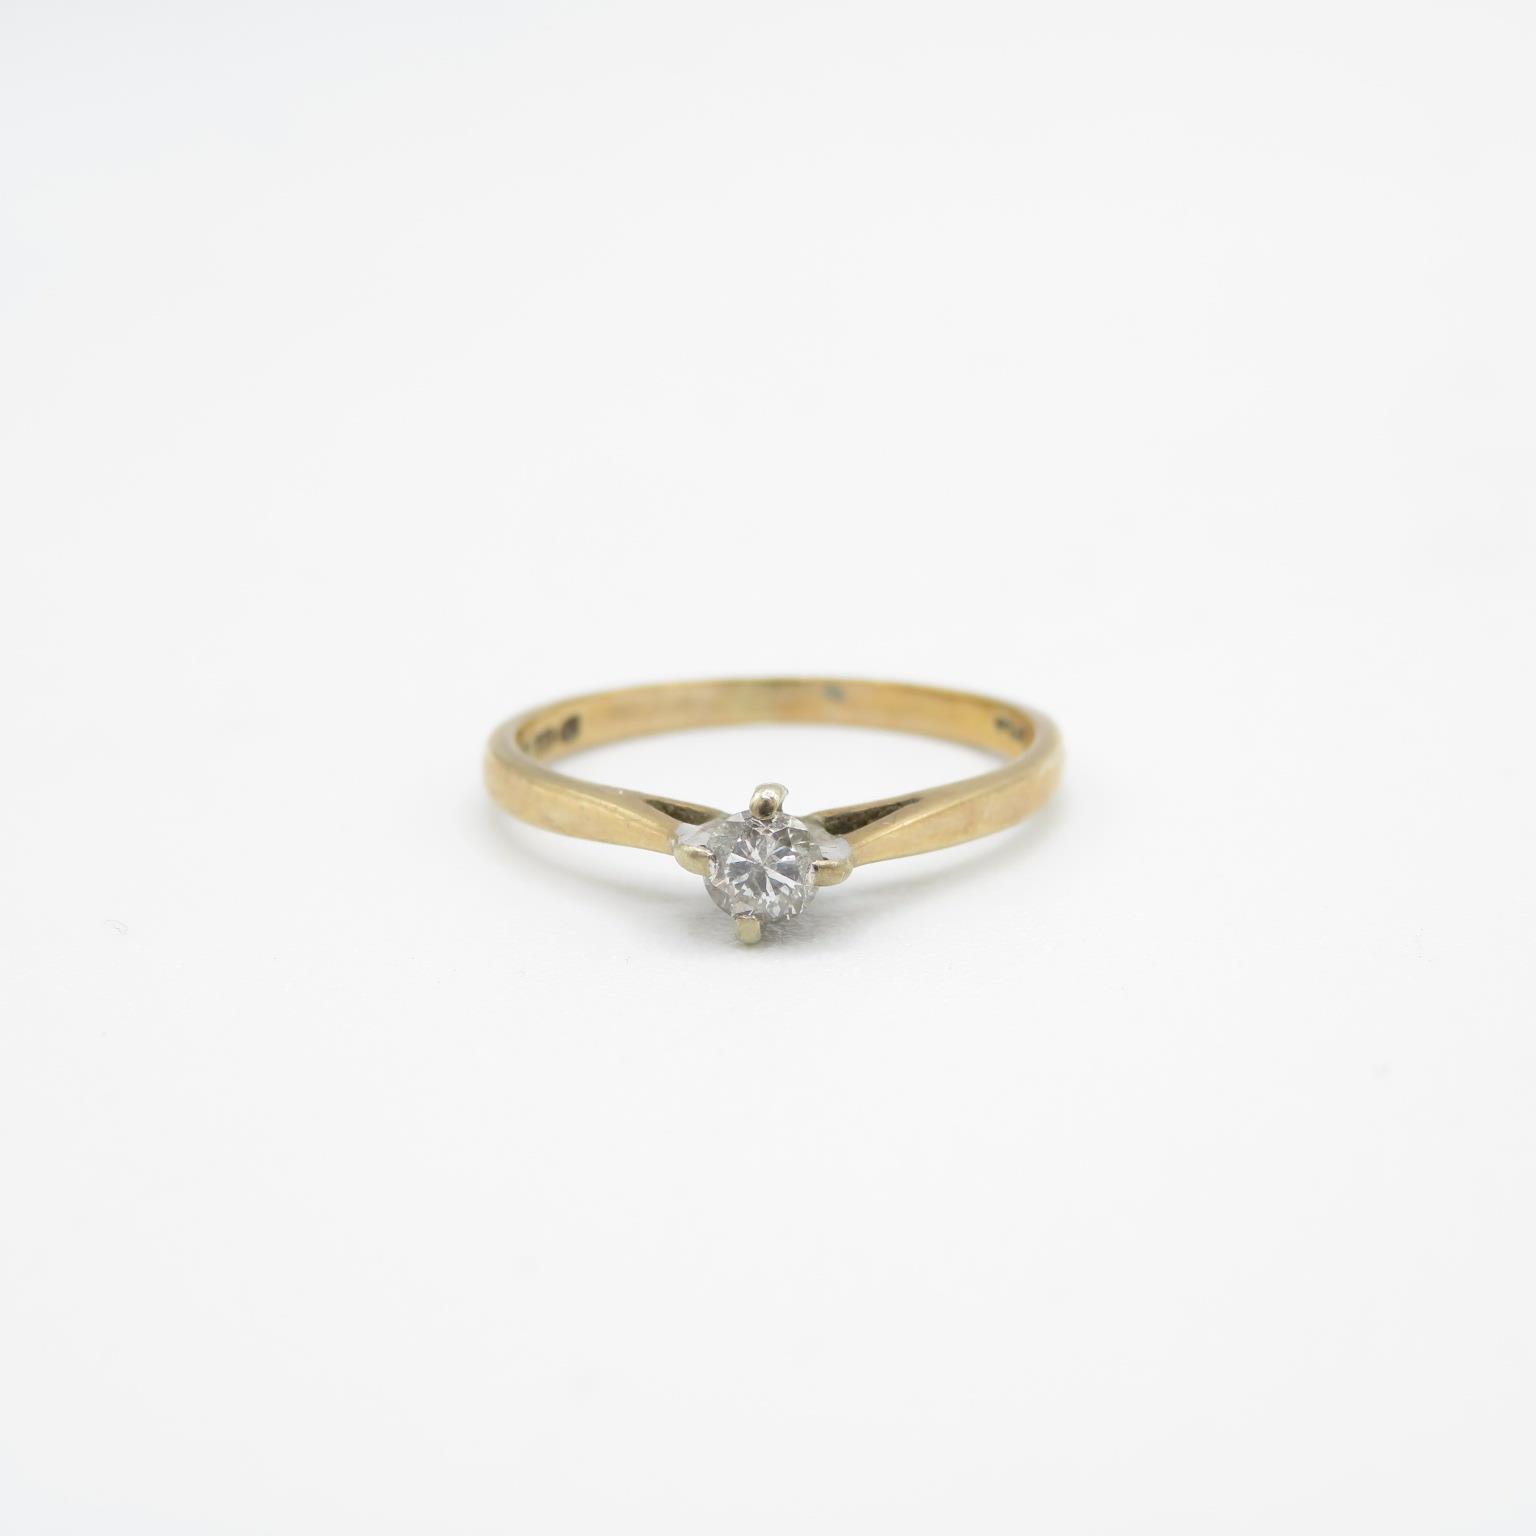 9ct gold diamond solitaire ring, claw set Size L - 1.2 g